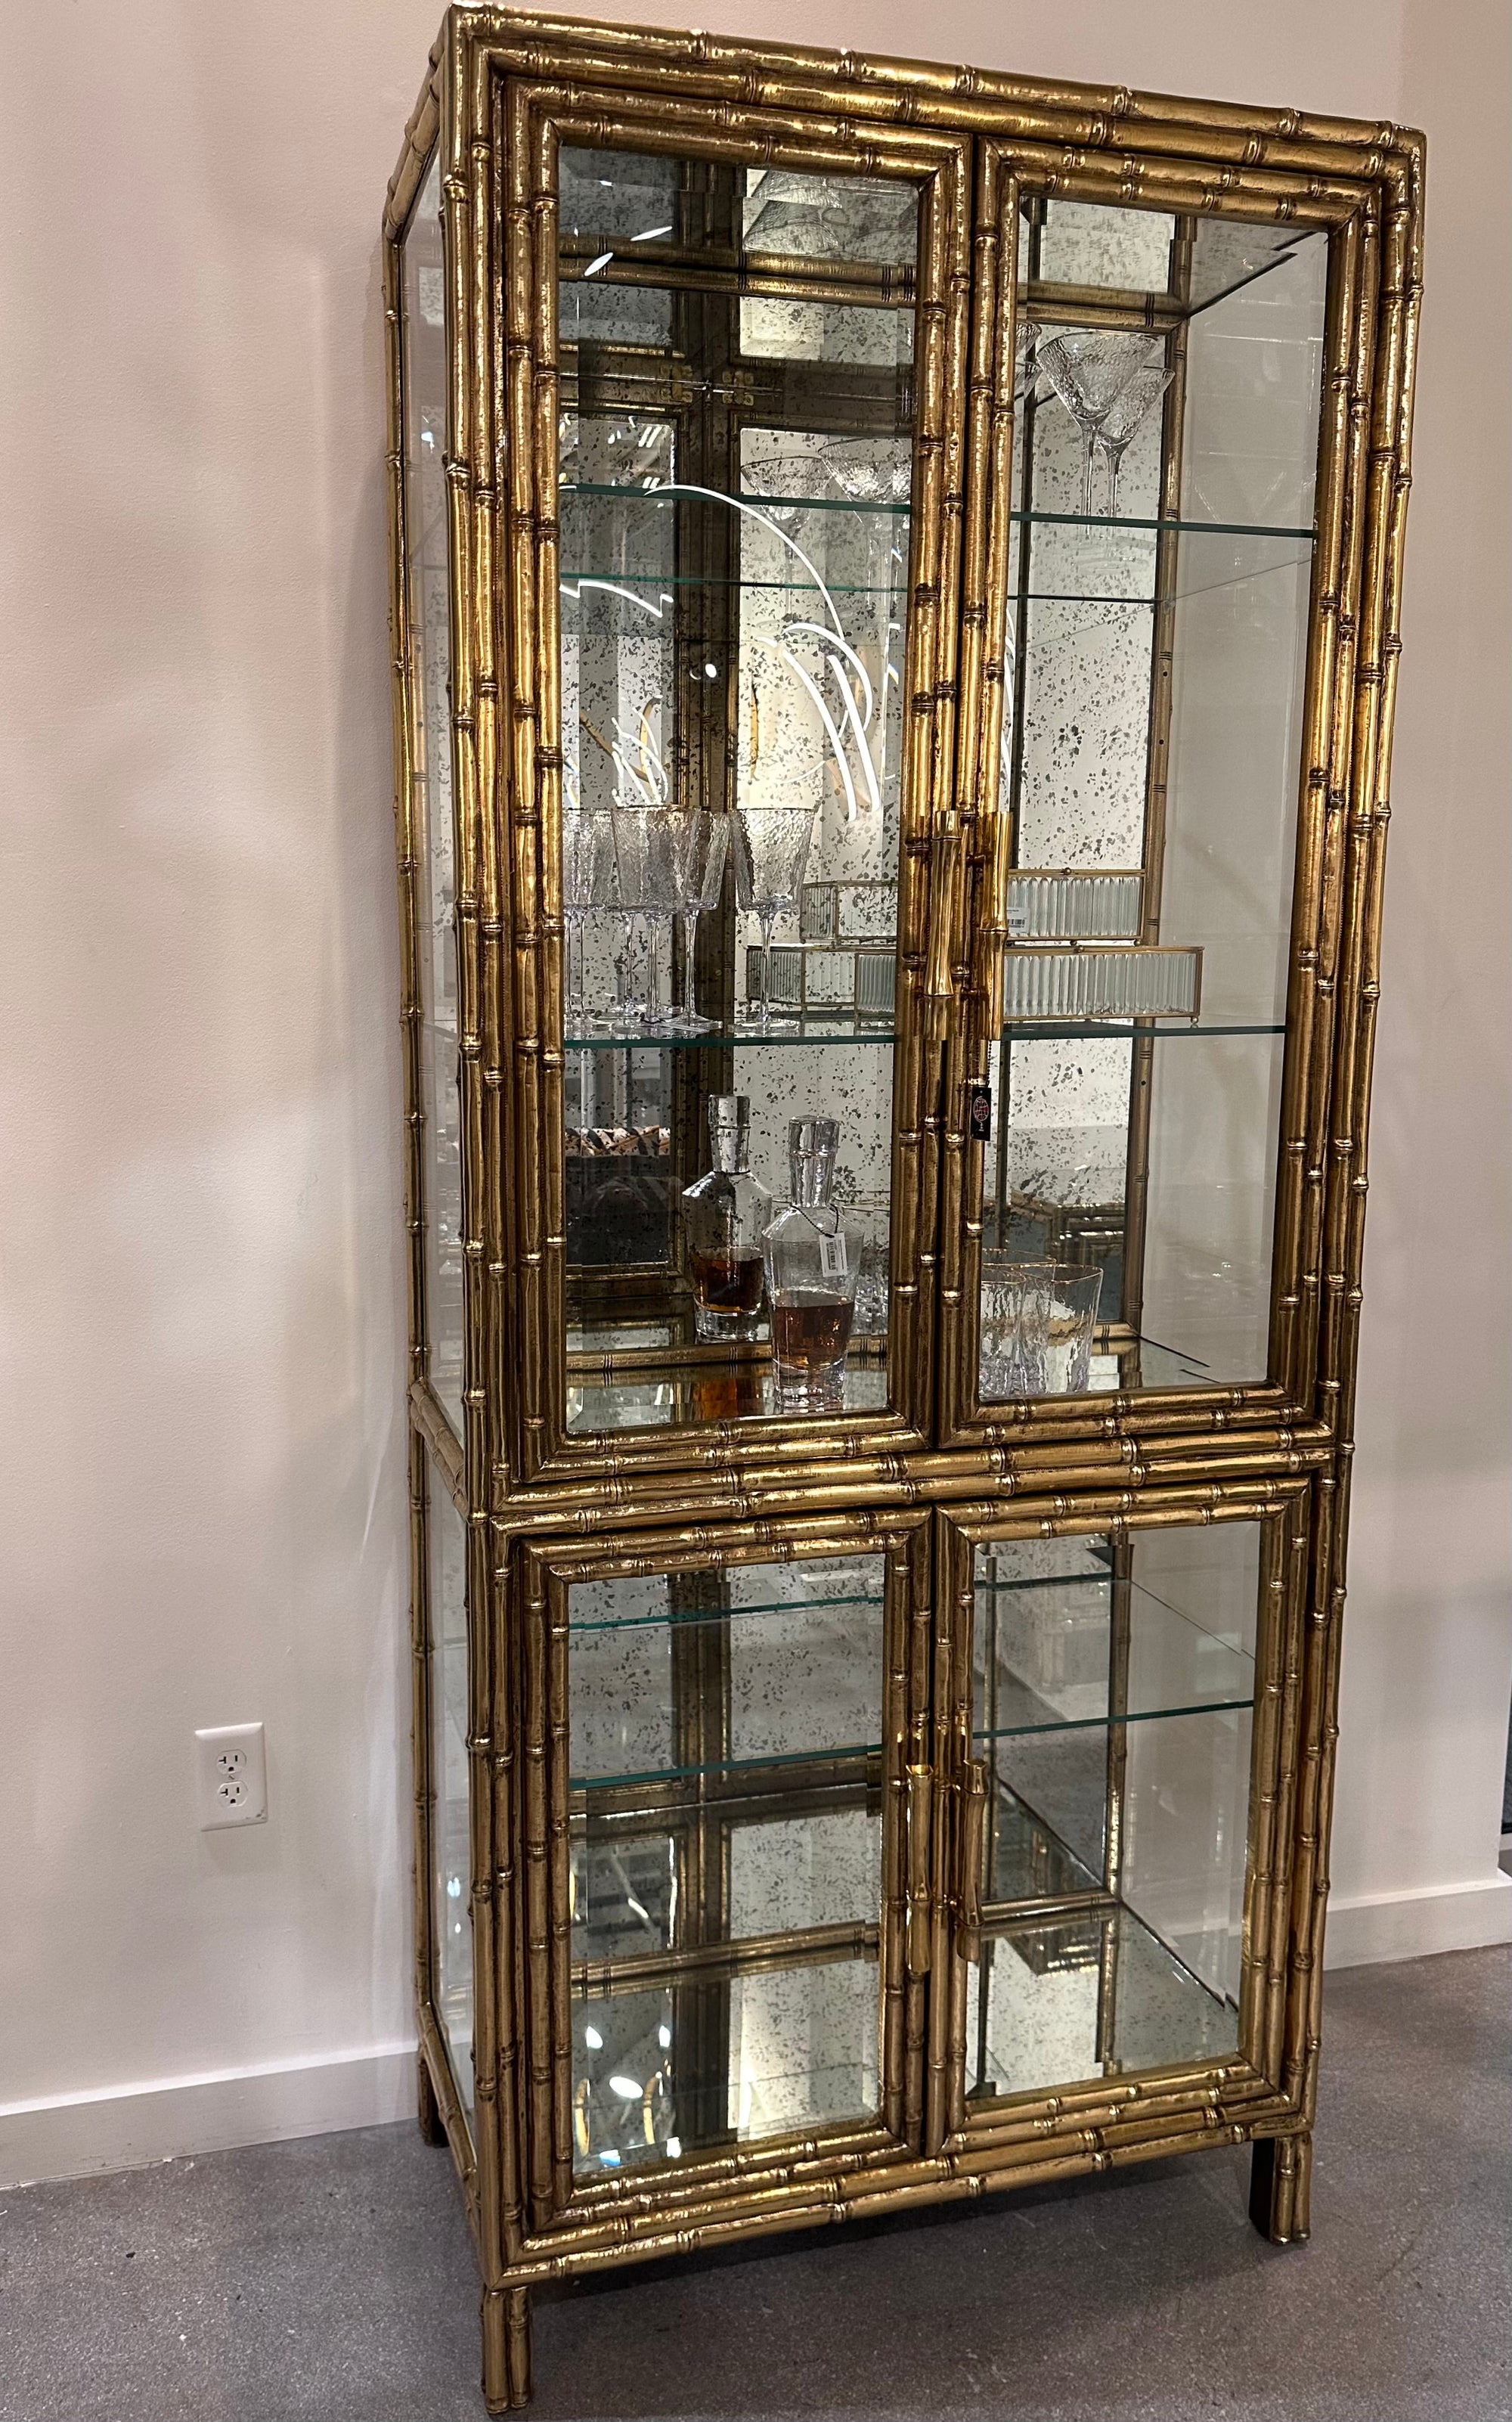 LUXURY IRON AND MIRROR DISPLAY CABENET FOR SALE, BRASS BAMBOO AND GLASS CABINET